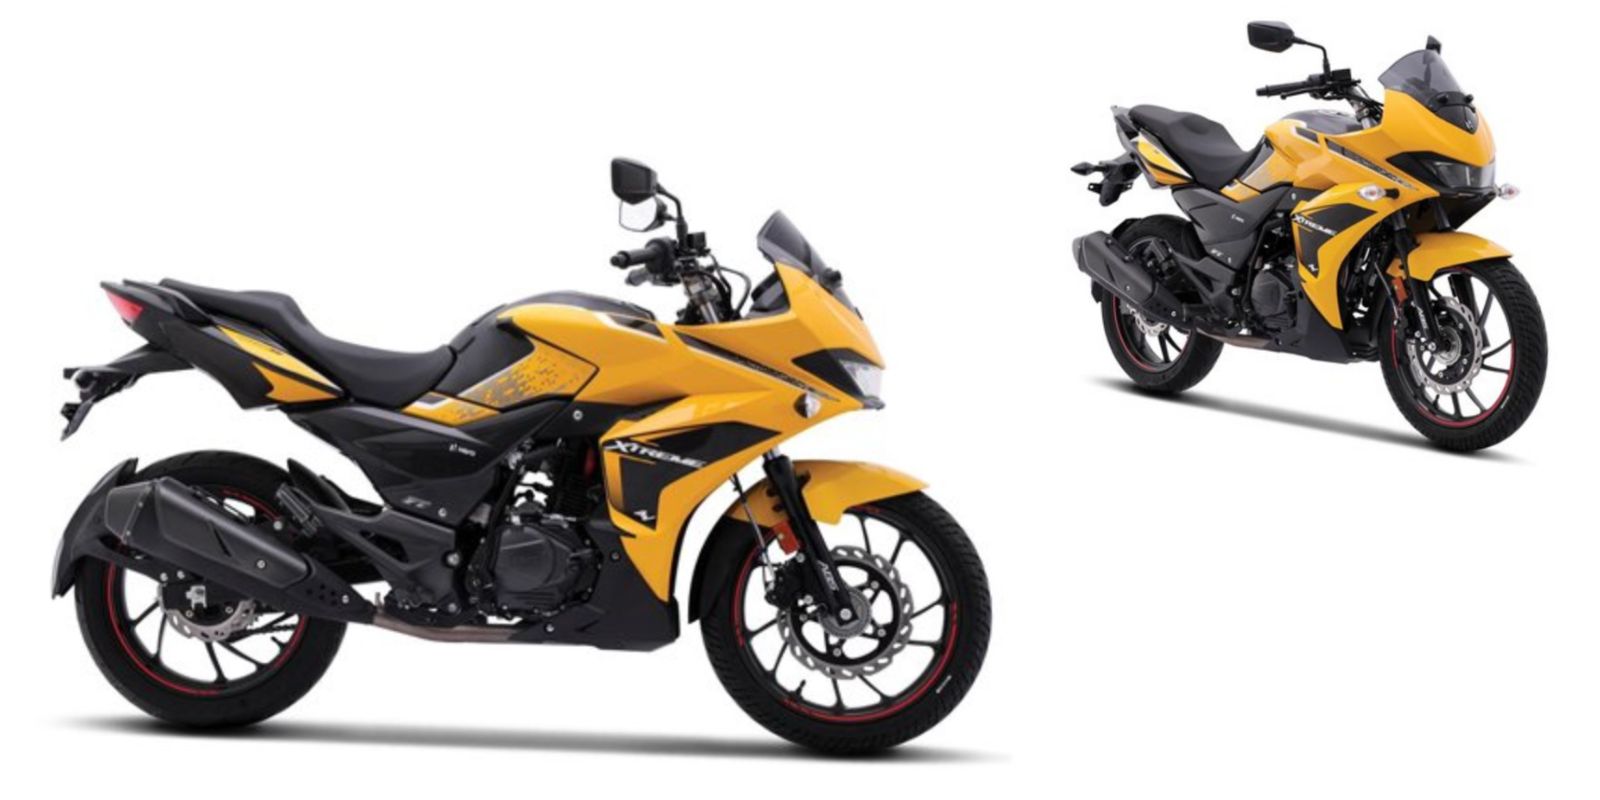 2023 Hero Xtreme 200S 4V Launched At Rs. 1.41 Lakh